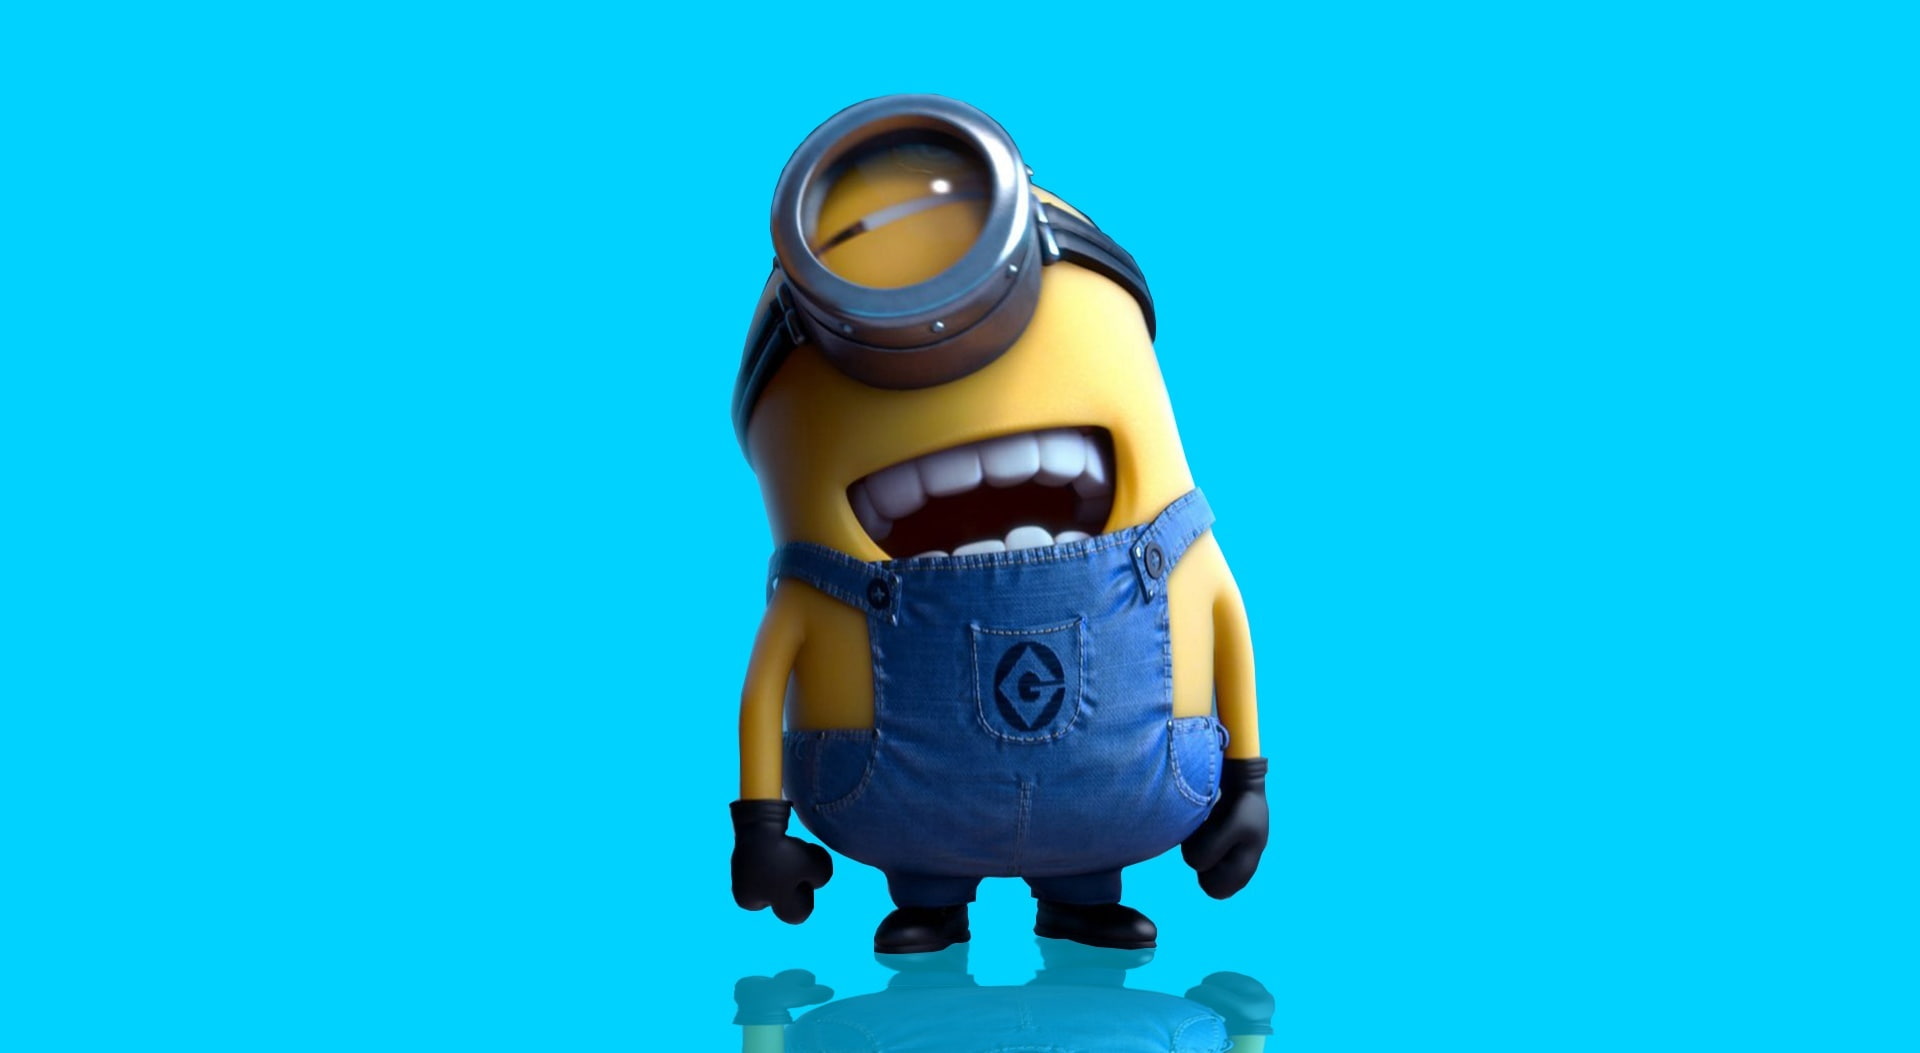 Minions, Despicable Me poster, Funny, blue, colored background